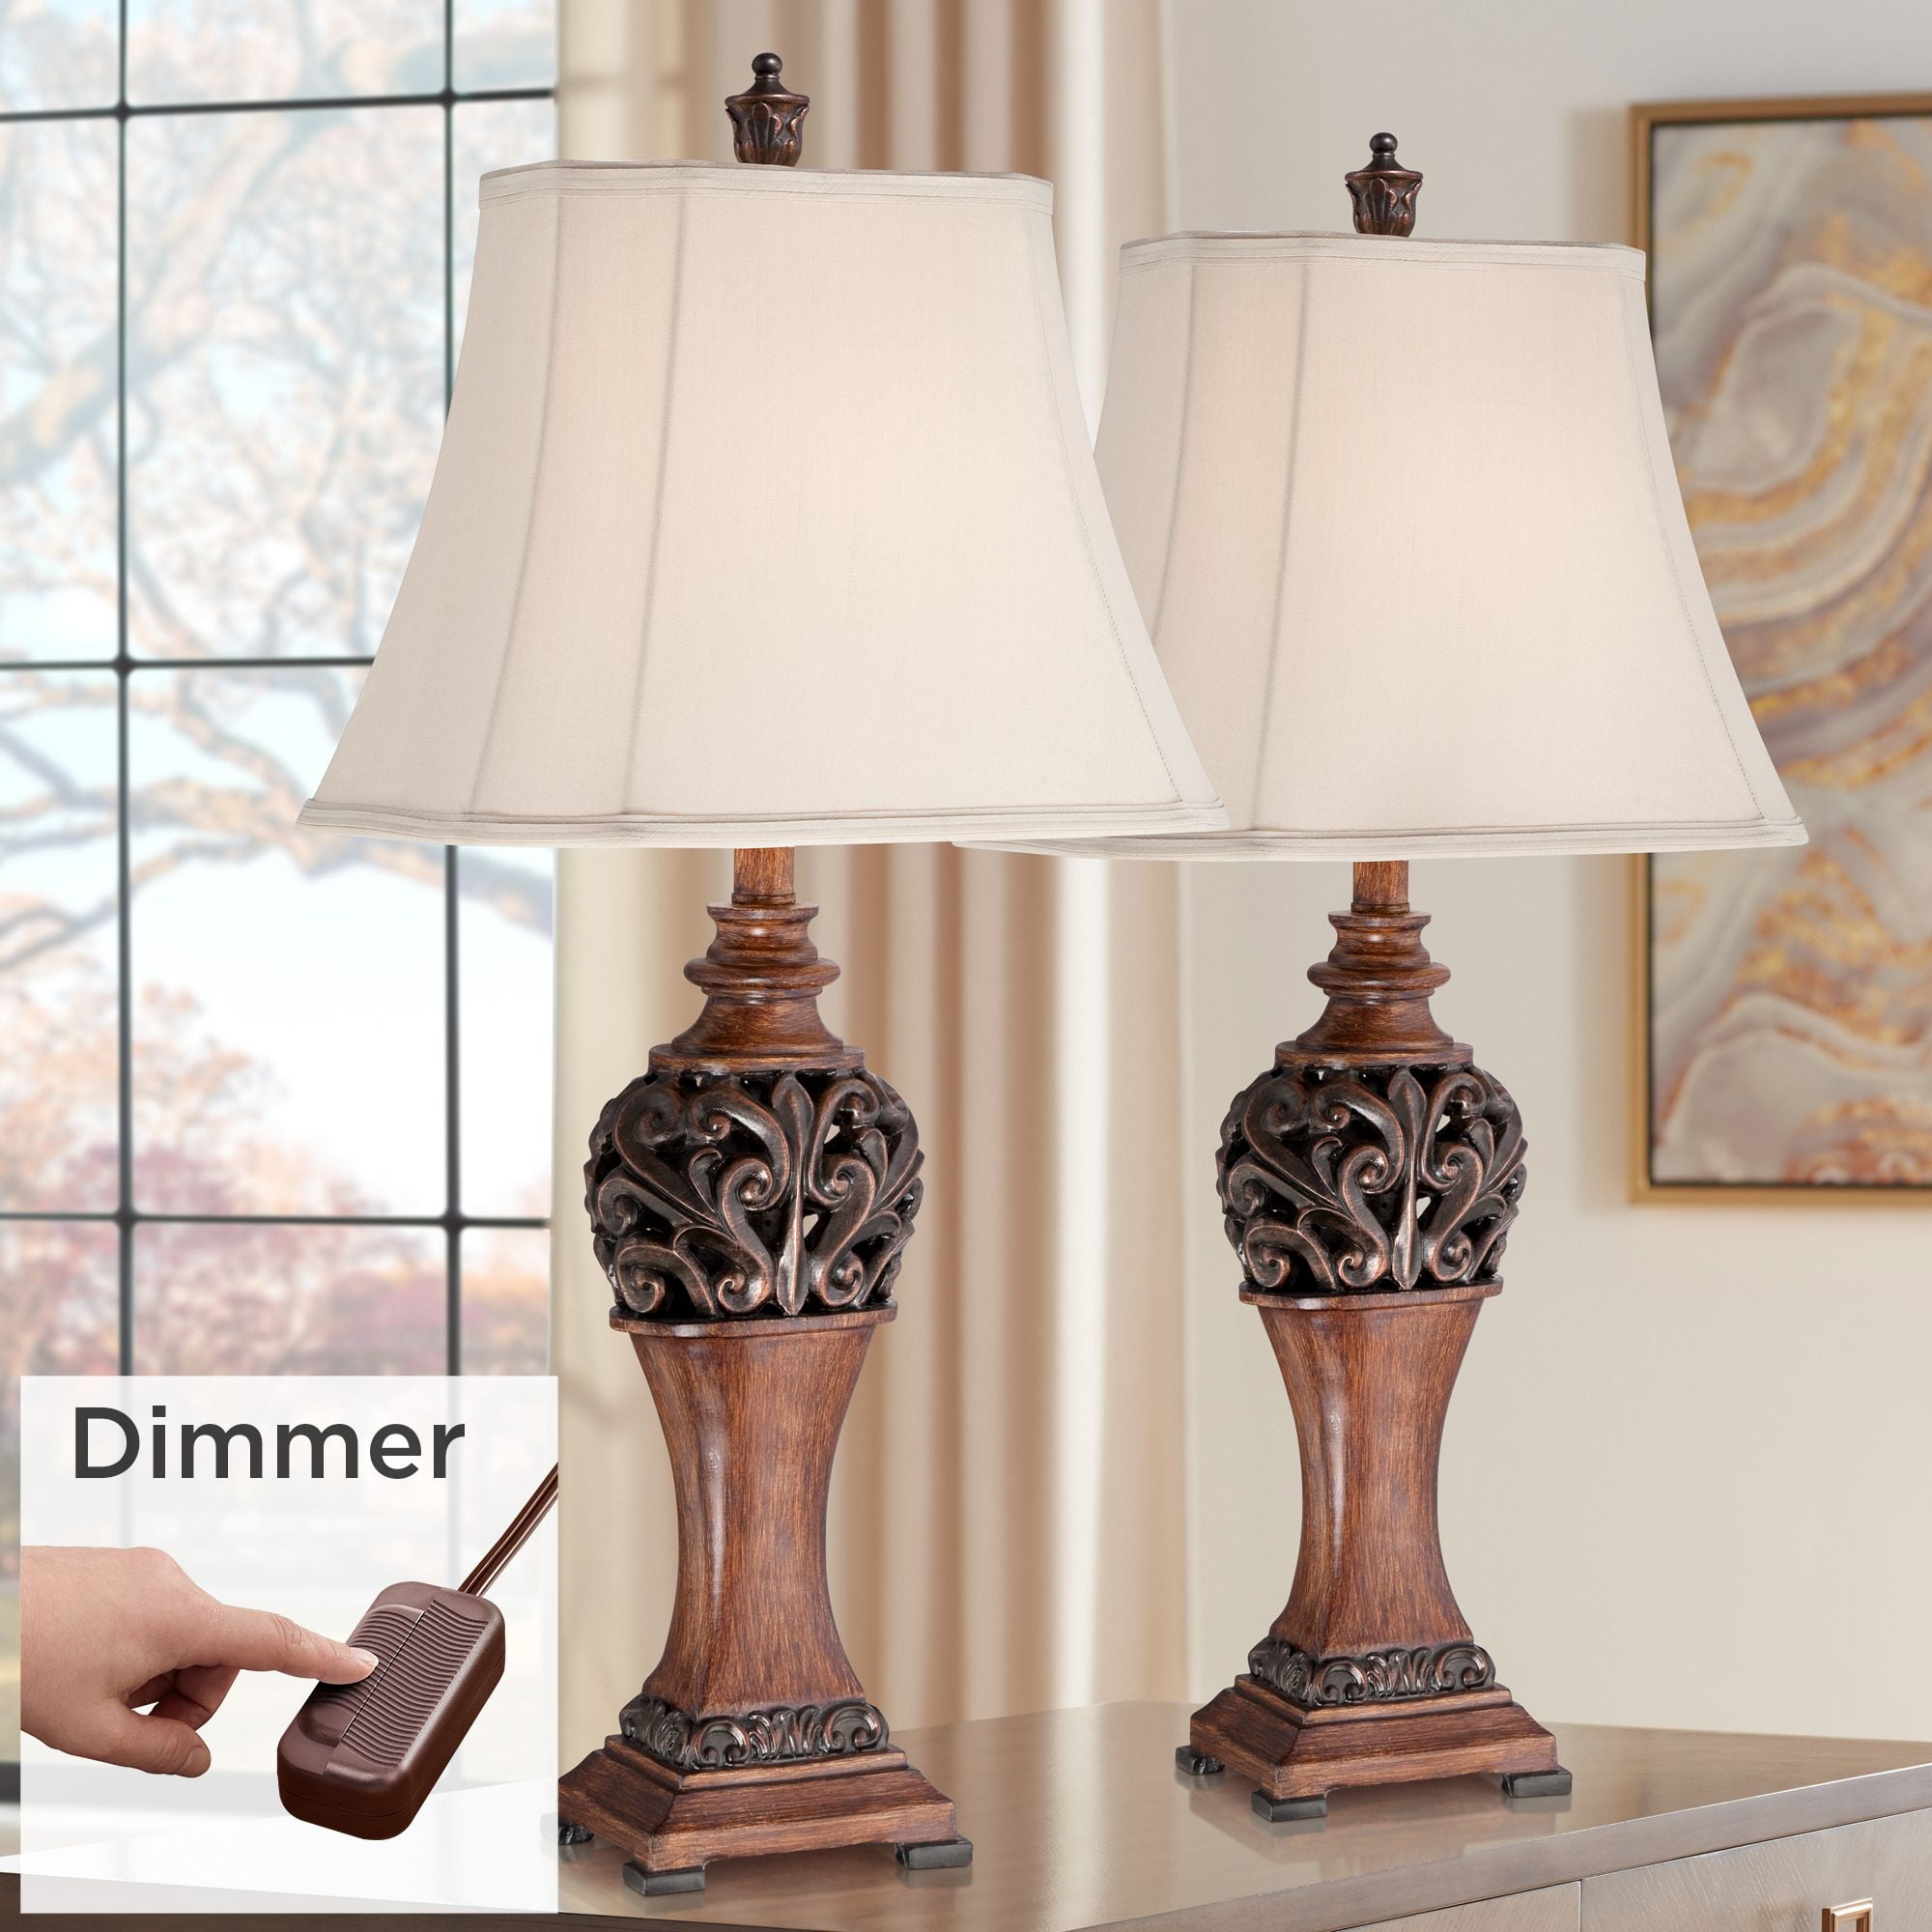 regency hill exeter traditional table lamps 30" tall set of 2 bronze wood  carved leaf with table top dimmers cream rectangular shade for living room